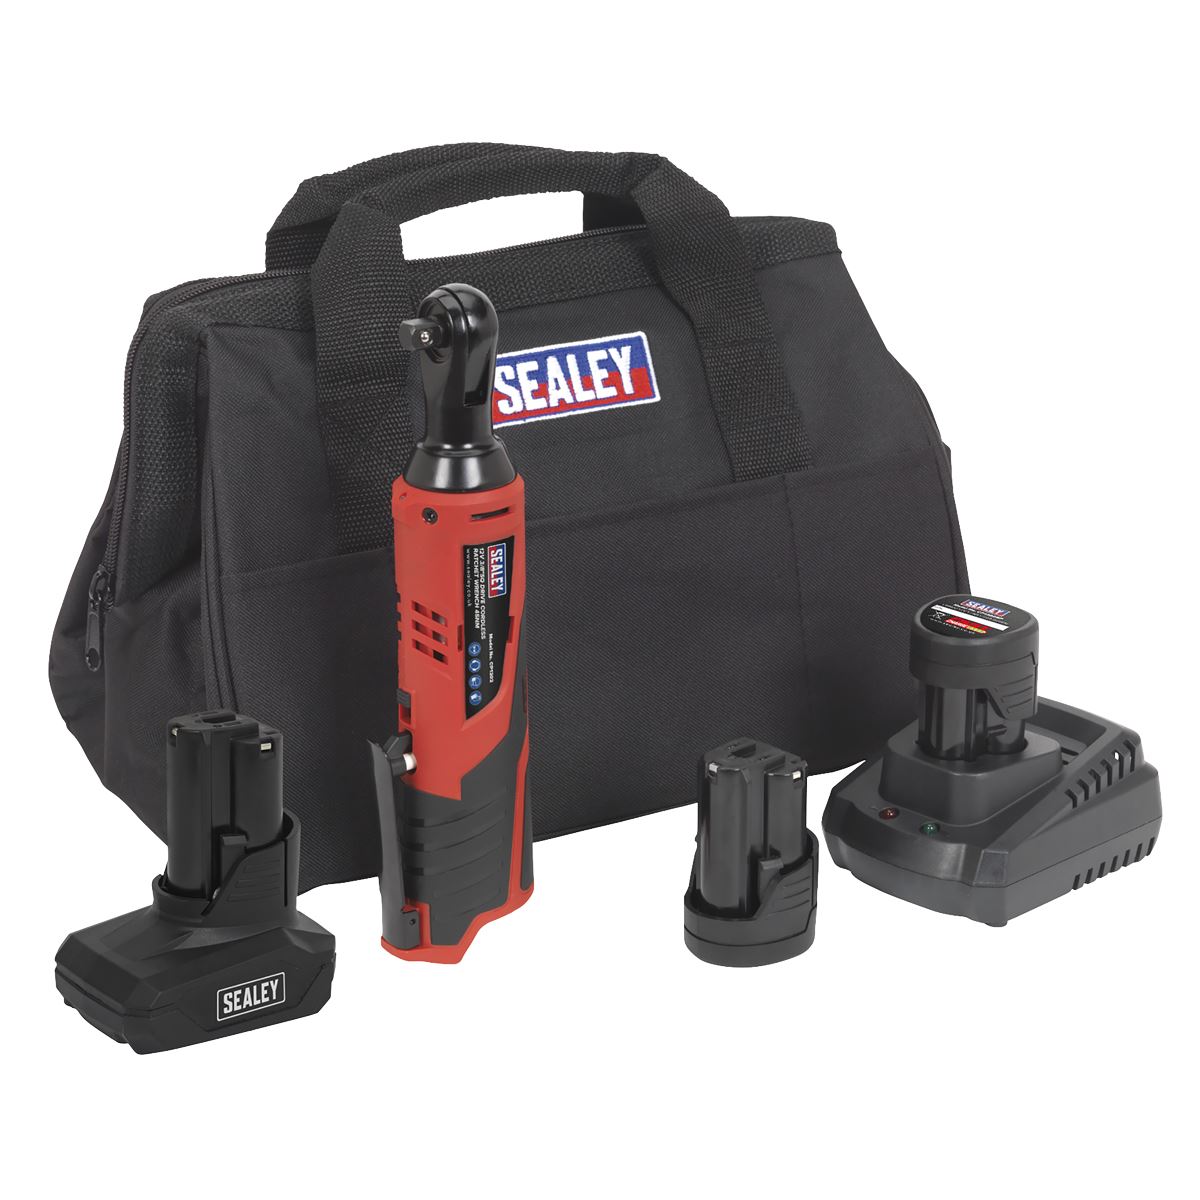 Sealey Ratchet Wrench Kit 3/8"Sq Drive 12V Lithium-ion - 3 Batteries